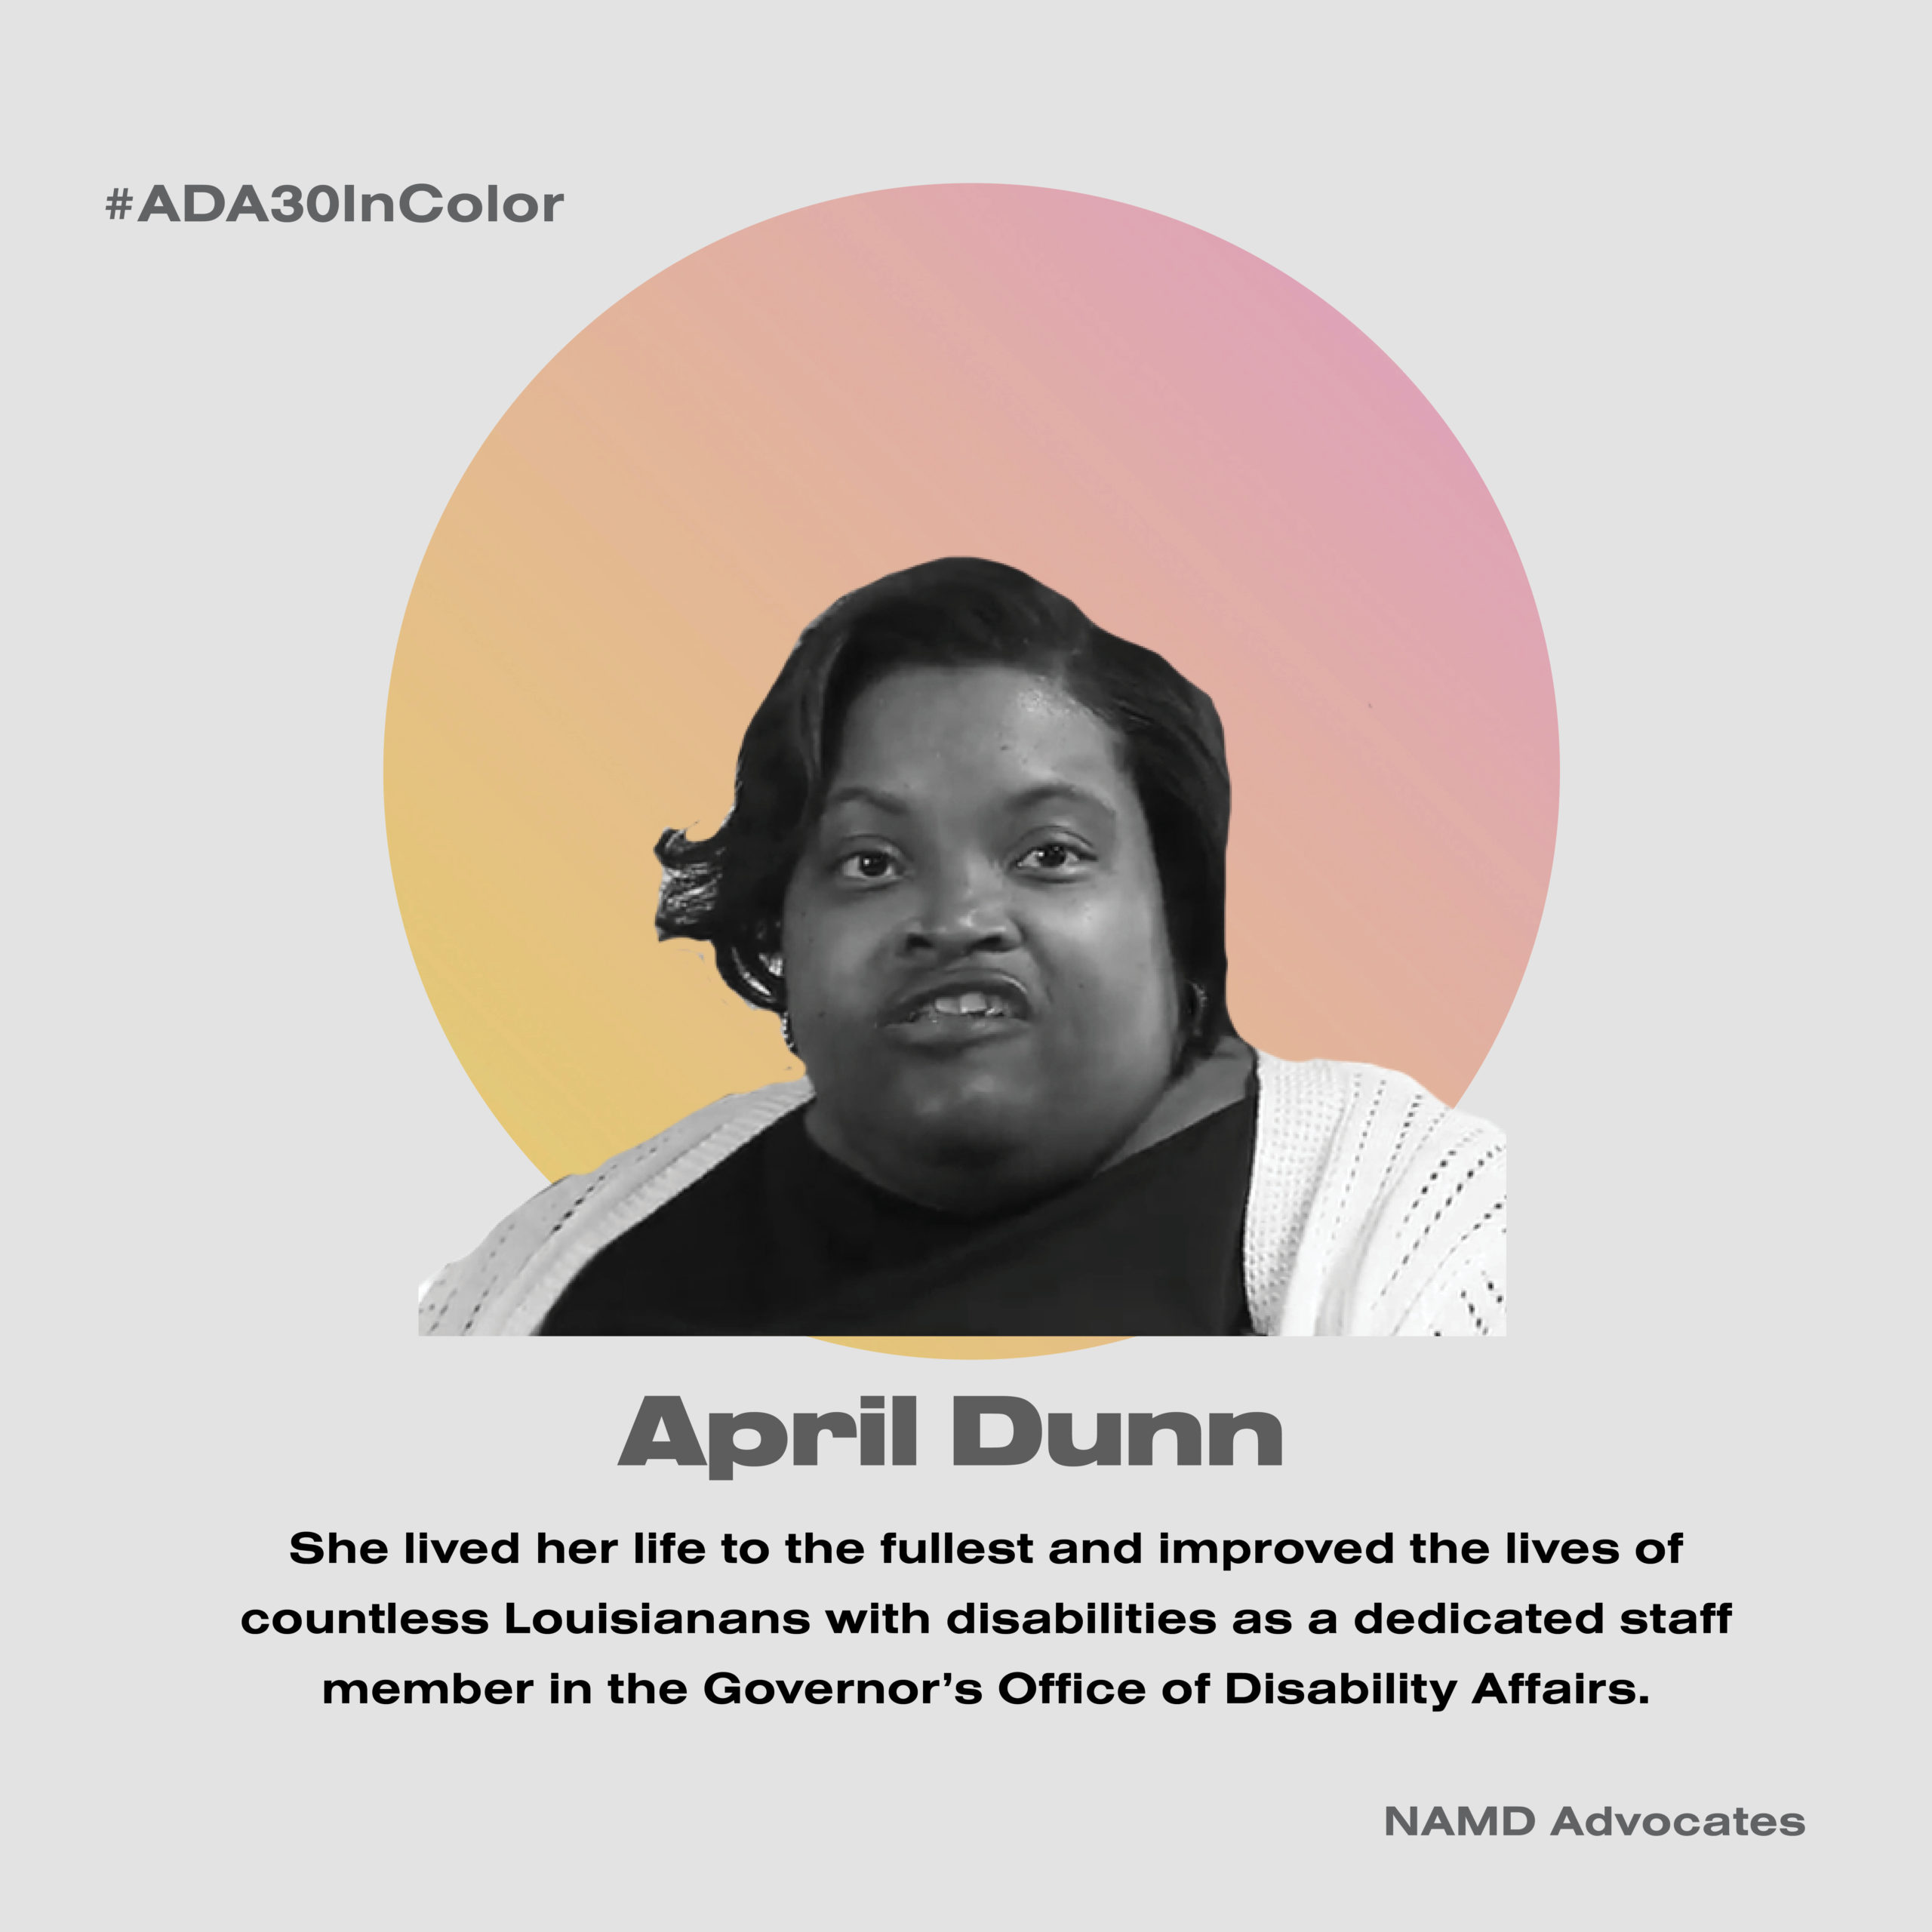 April Dunn. She lived her life to the fullest and improved the lives of countless Louisianans with disabilities as a dedicated staff member in the Governor's Office of Disability Affairs.